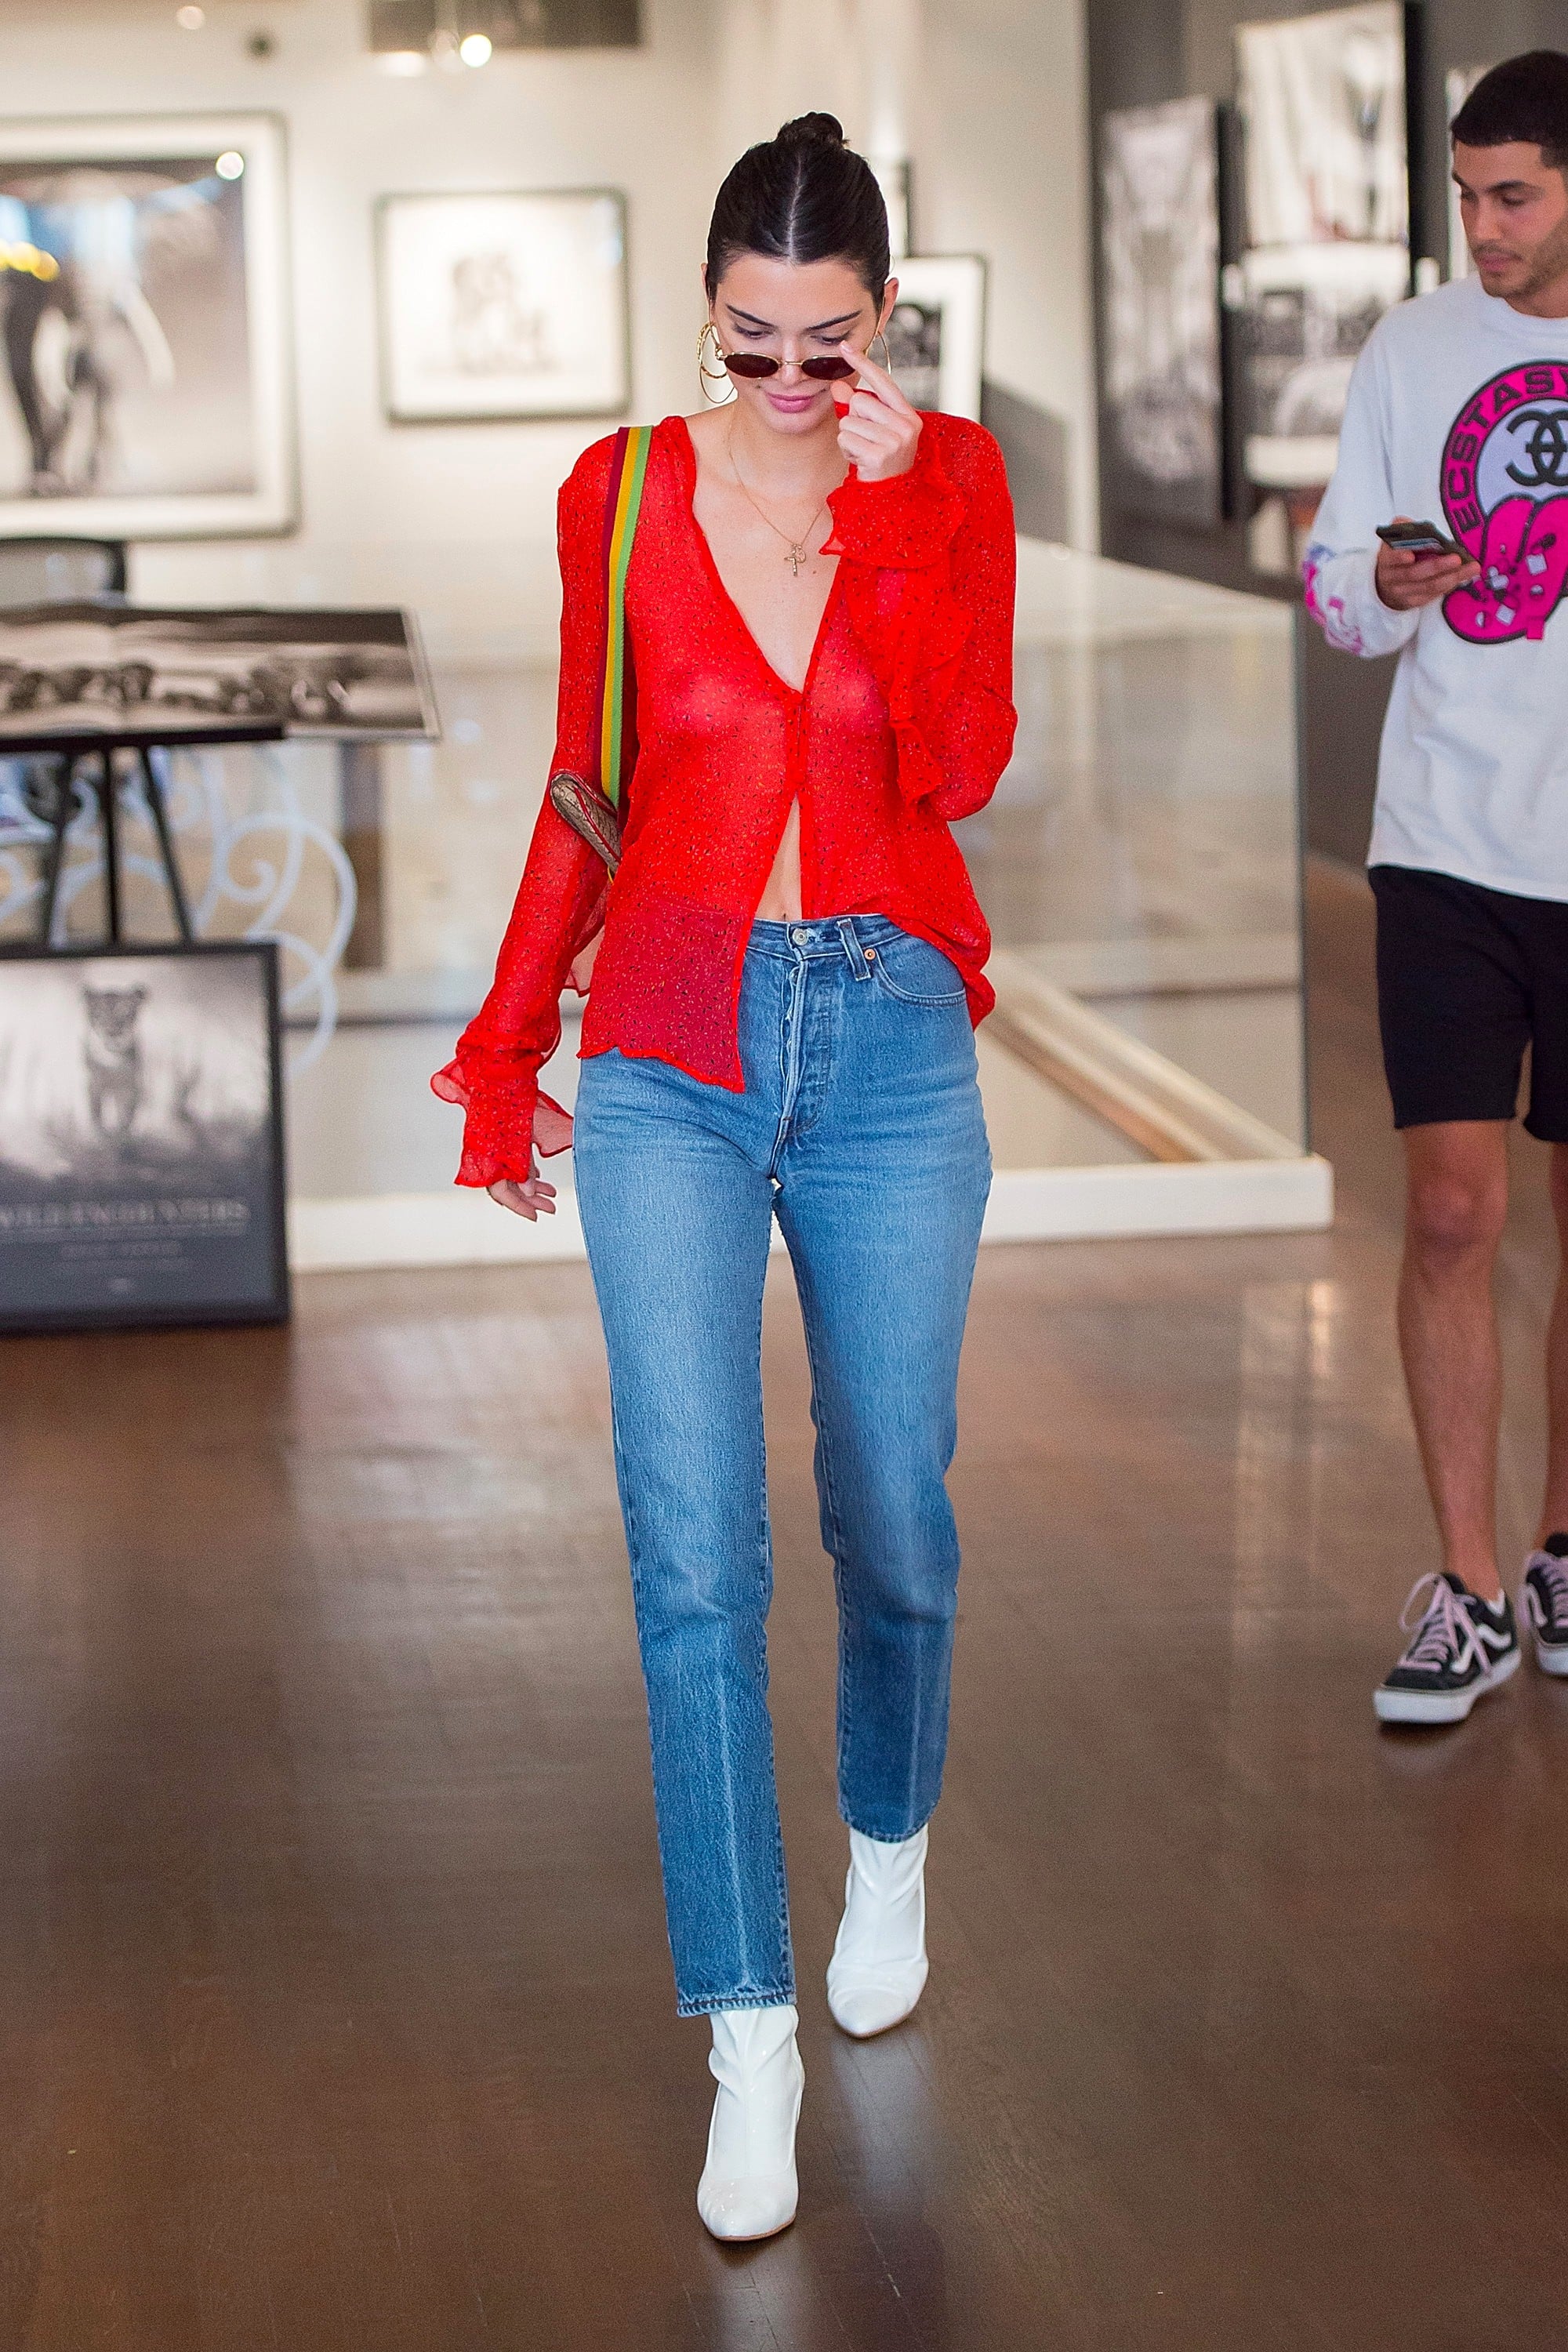 Kendall Jenner Wearing Sheer Red Top